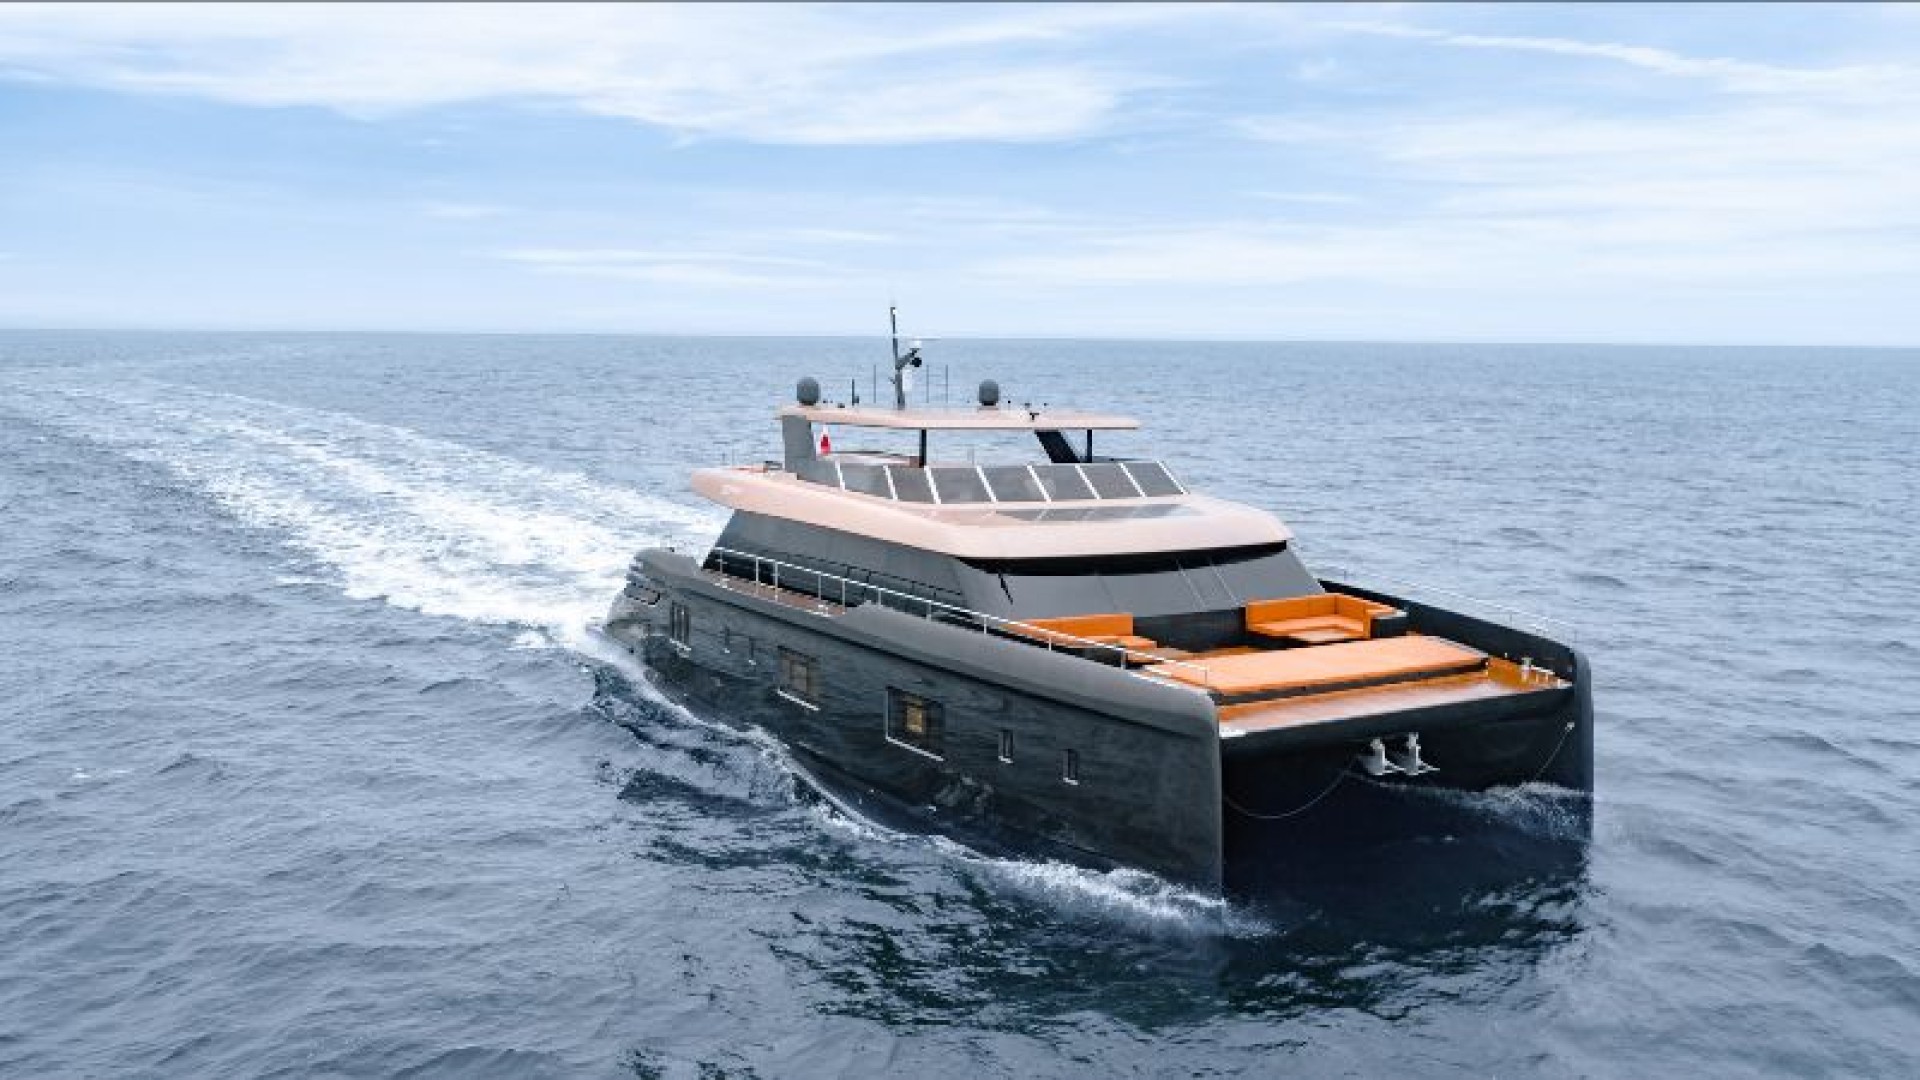 Super Catamarans on the Rise: Another 100 Sunreef Power Commissioned